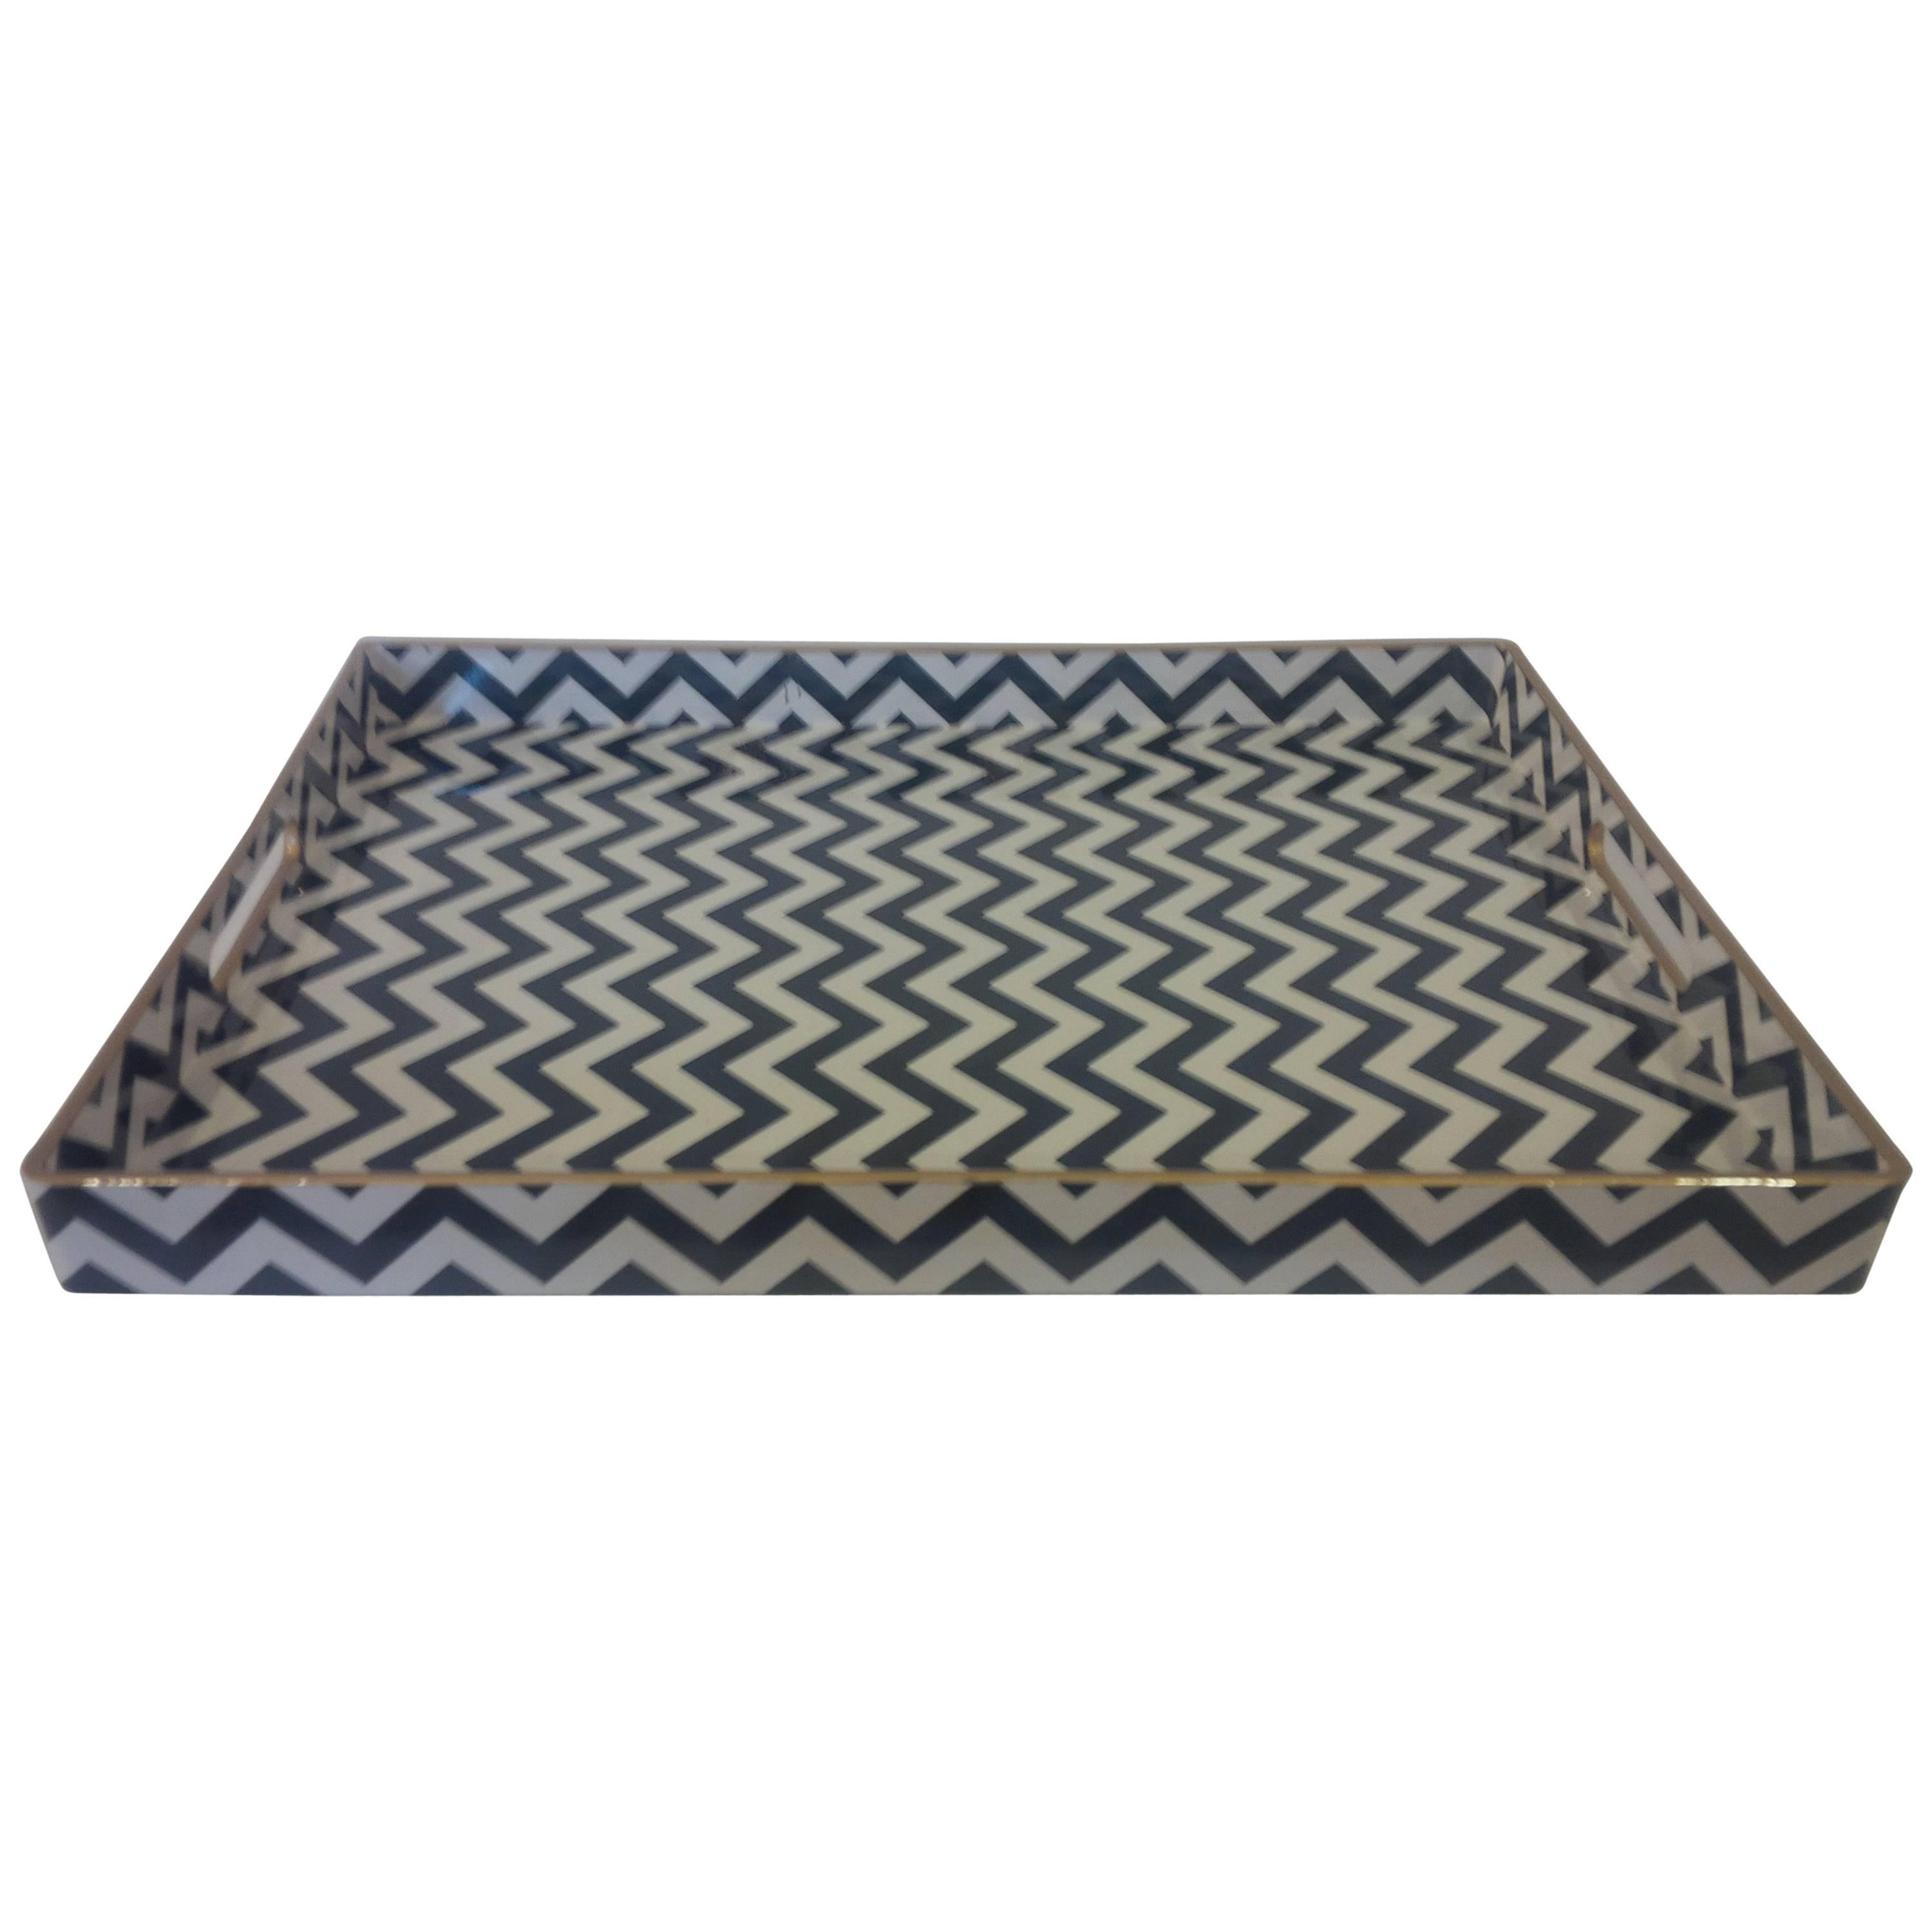 Zigzag Black and White Lacquer Tray with Gold Edge